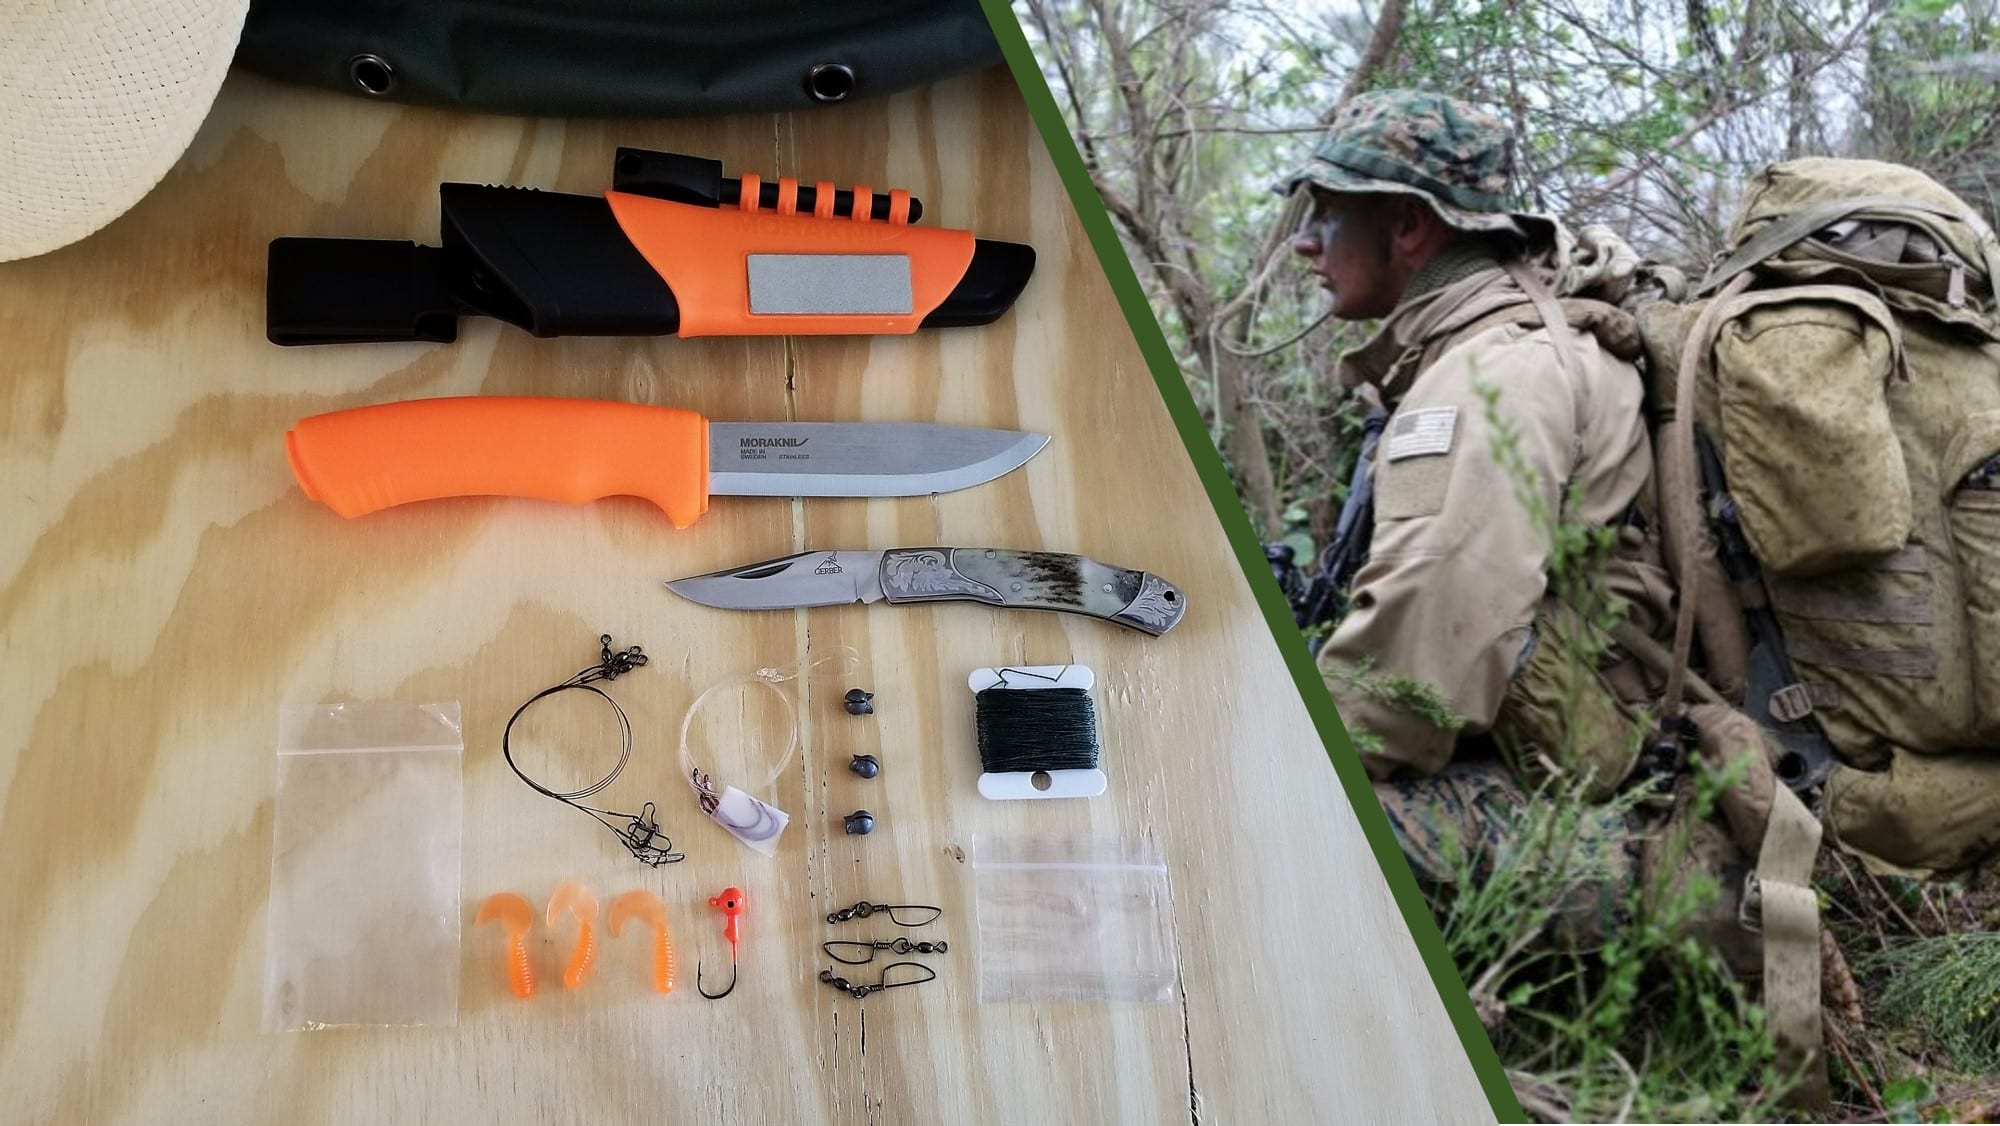 How To Build An Emergency Fishing Kit SIGMA 3 Survival